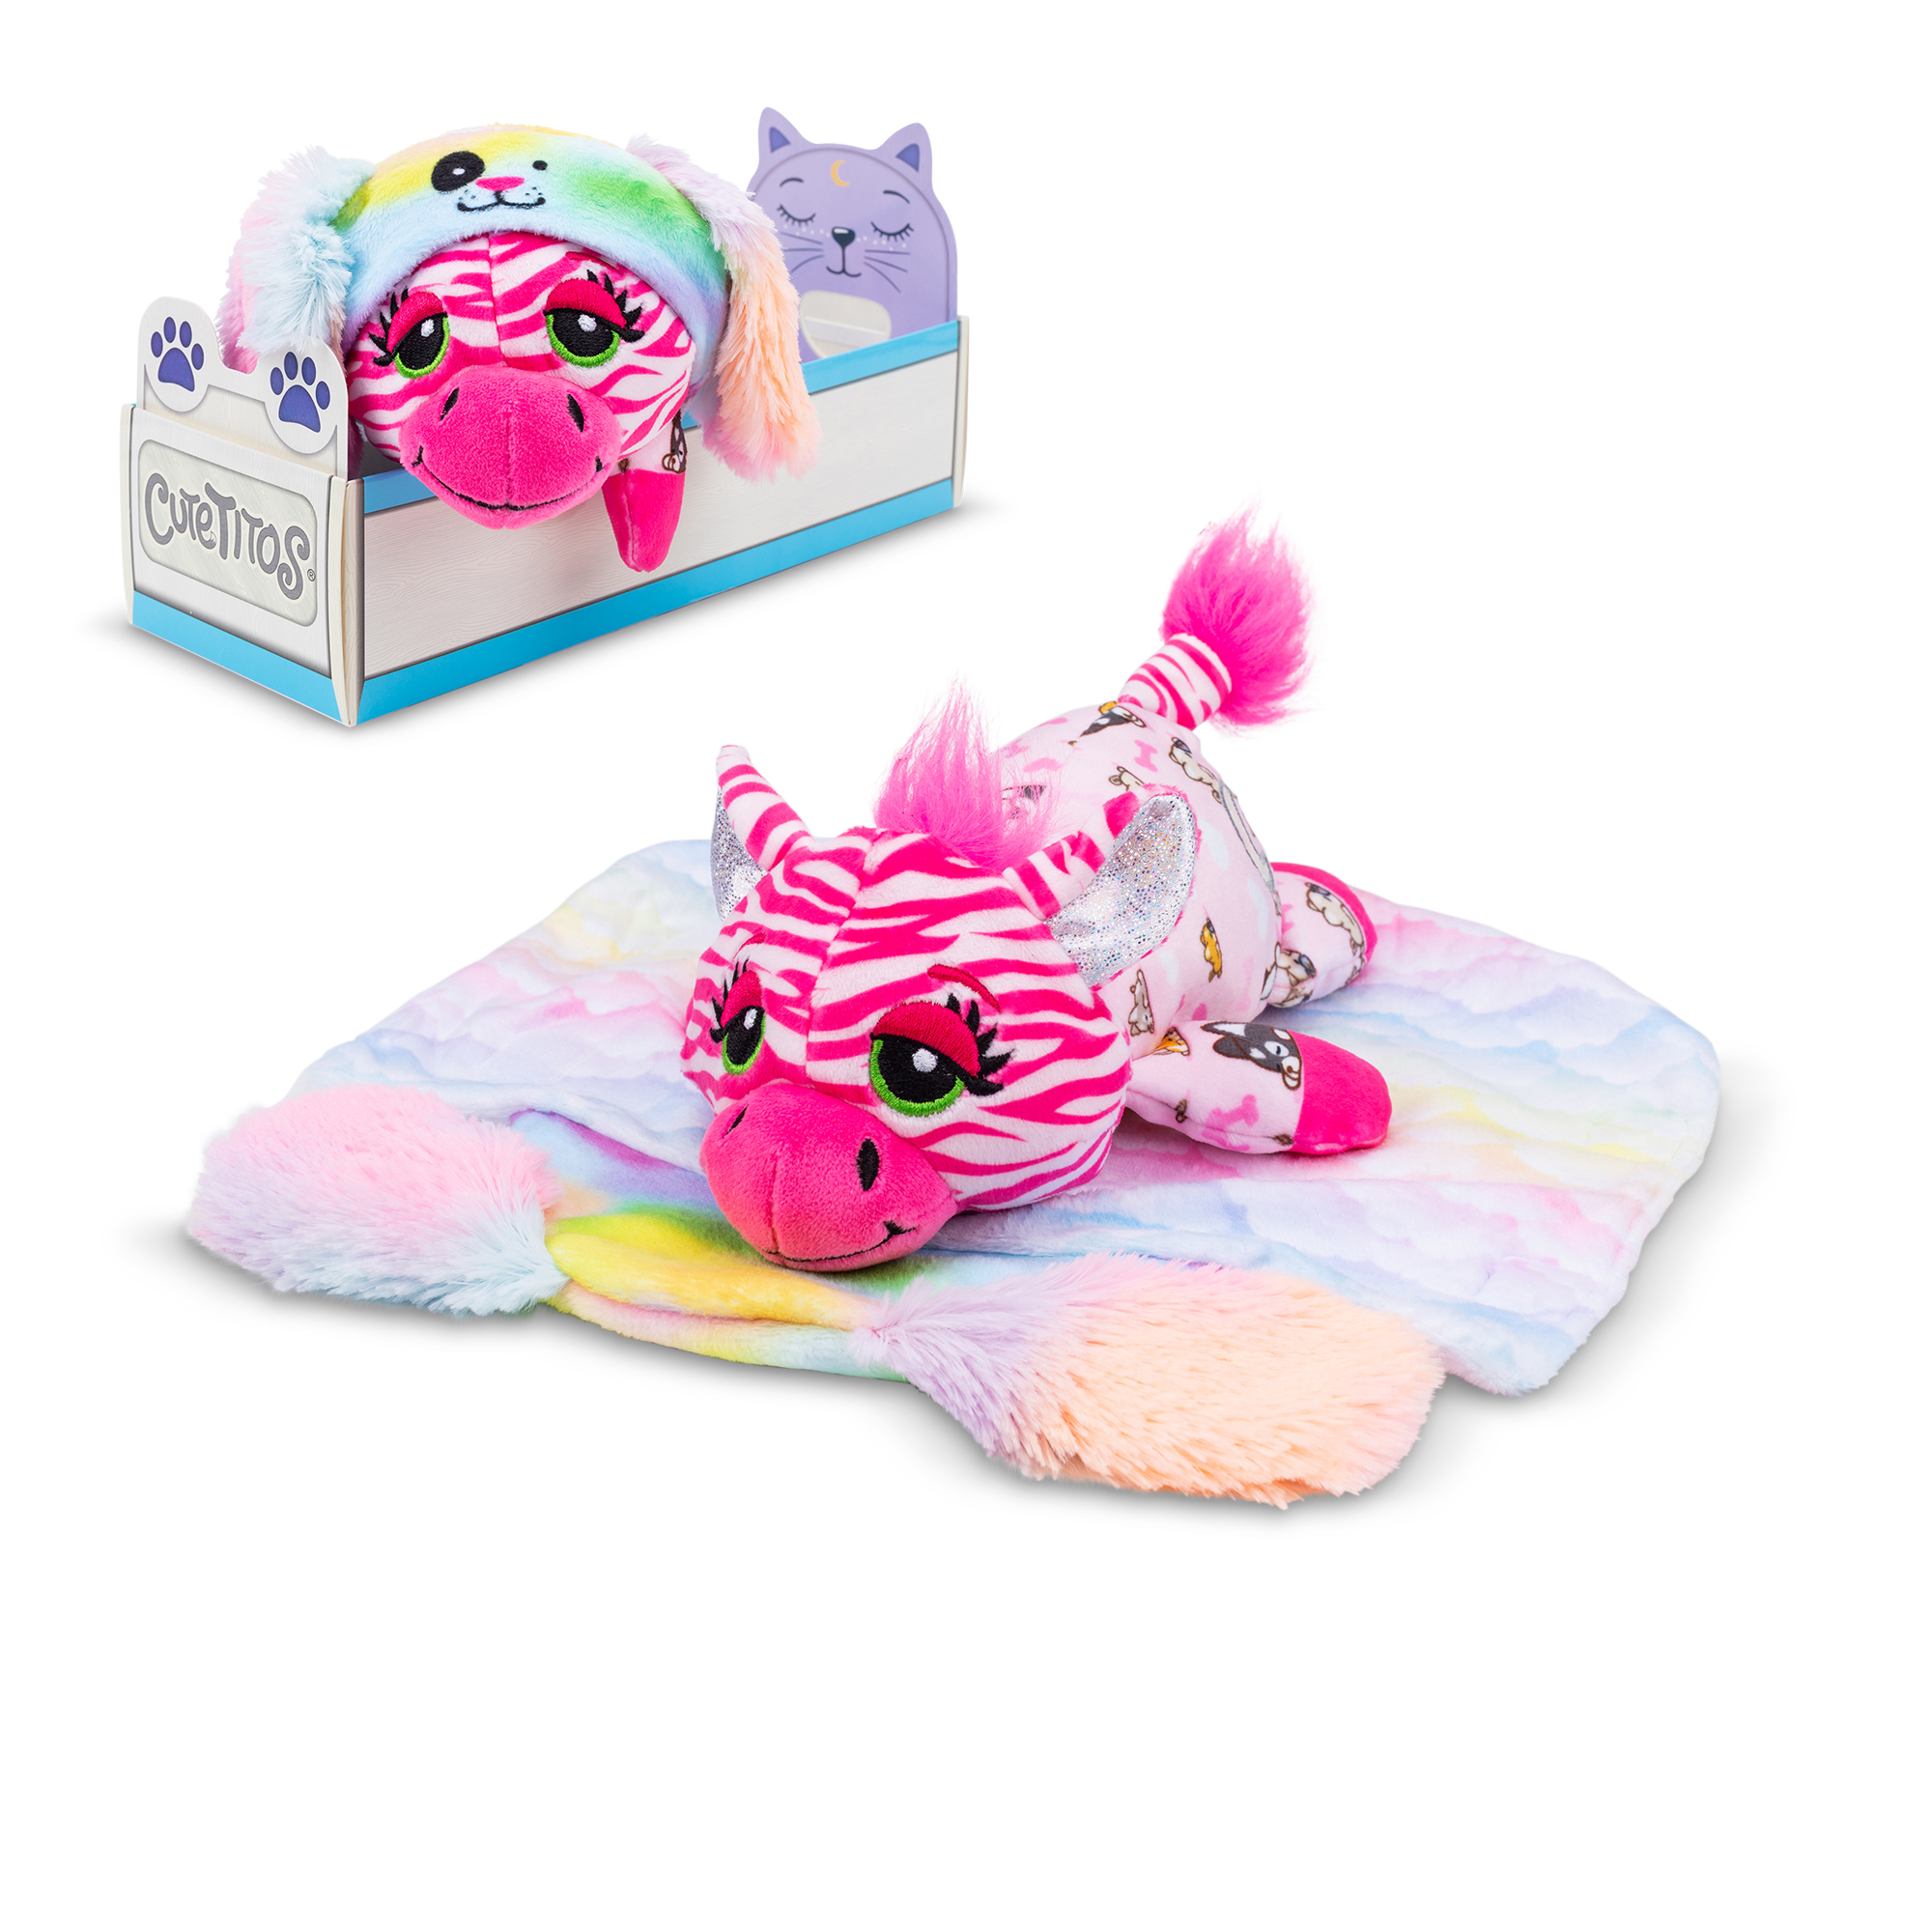 Cutetitos Sleepitos Surprise Stuffed Animals, Collectible Sleep Plush, Great for kids age 3 years old and up. - image 3 of 6